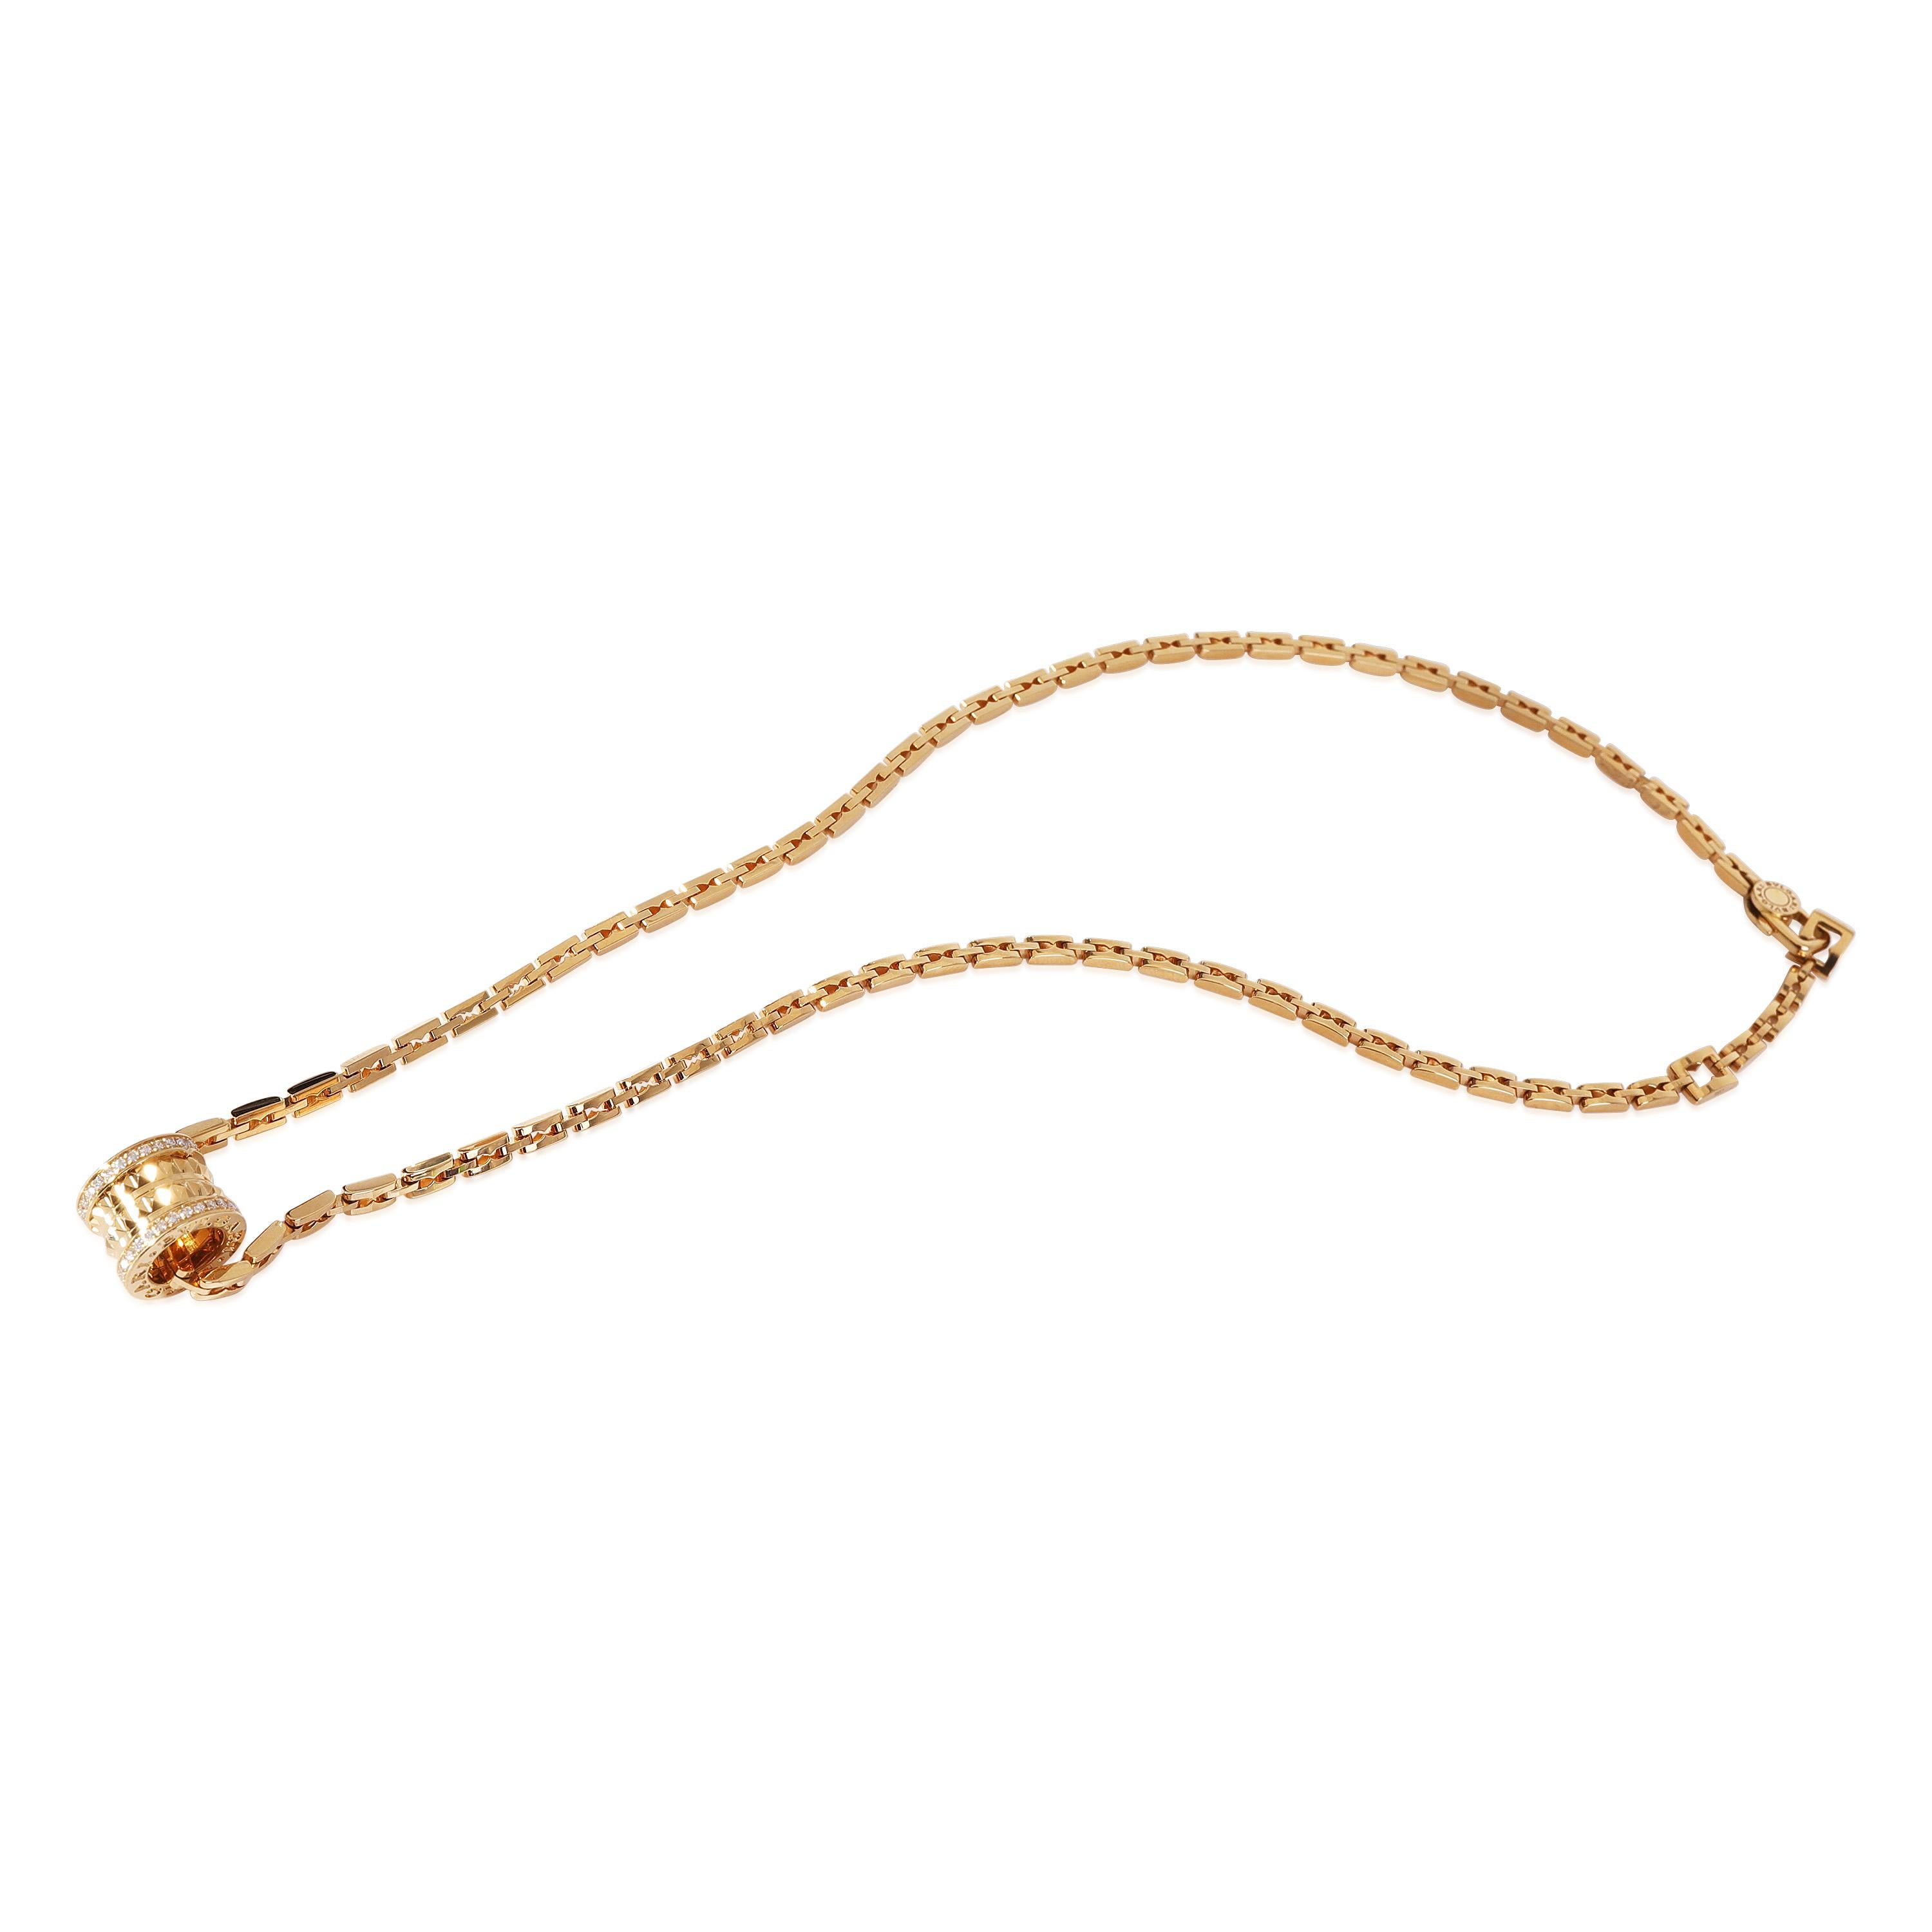 Bvlgari B.zero1 Diamond Pendant in 18k Yellow Gold 0.29 CTW

PRIMARY DETAILS
SKU: 120770
Listing Title: Bvlgari B.zero1 Diamond Pendant in 18k Yellow Gold 0.29 CTW
Condition Description: In excellent condition. Length is adjustable, can be worn as